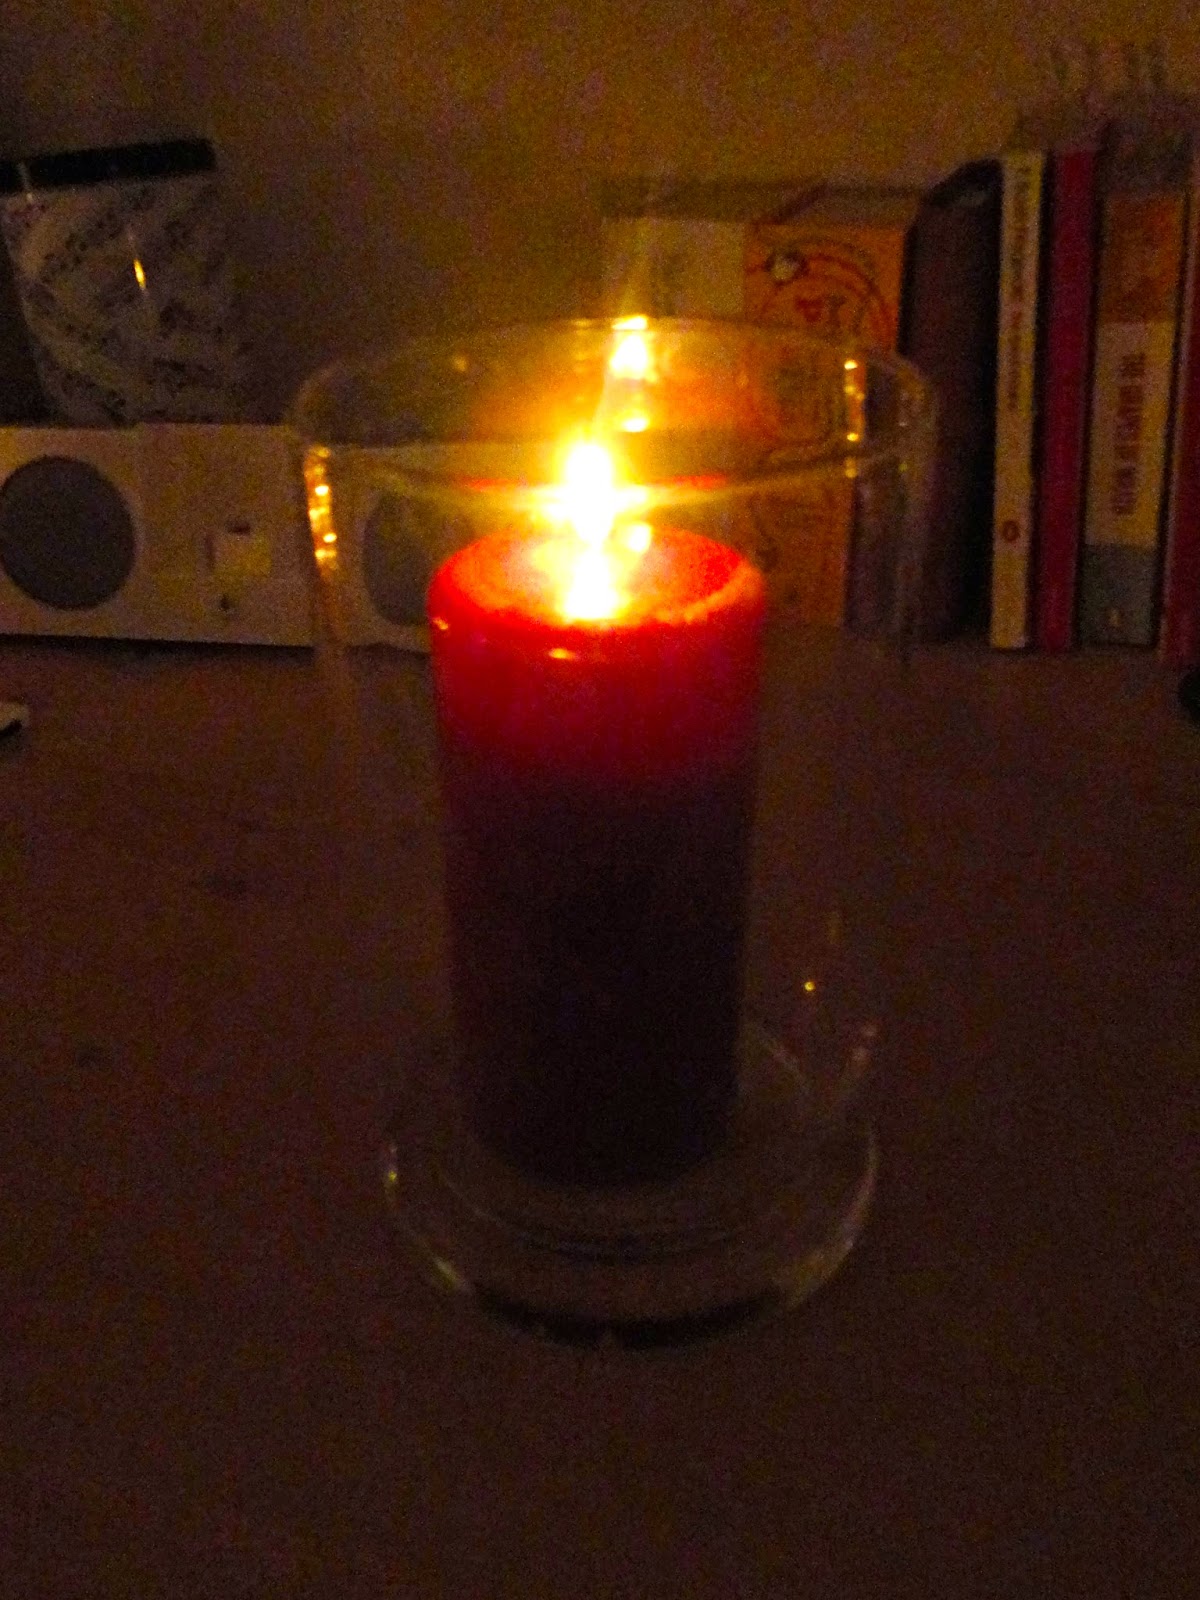 Red scented pillar candle lit in glass hurricane jar